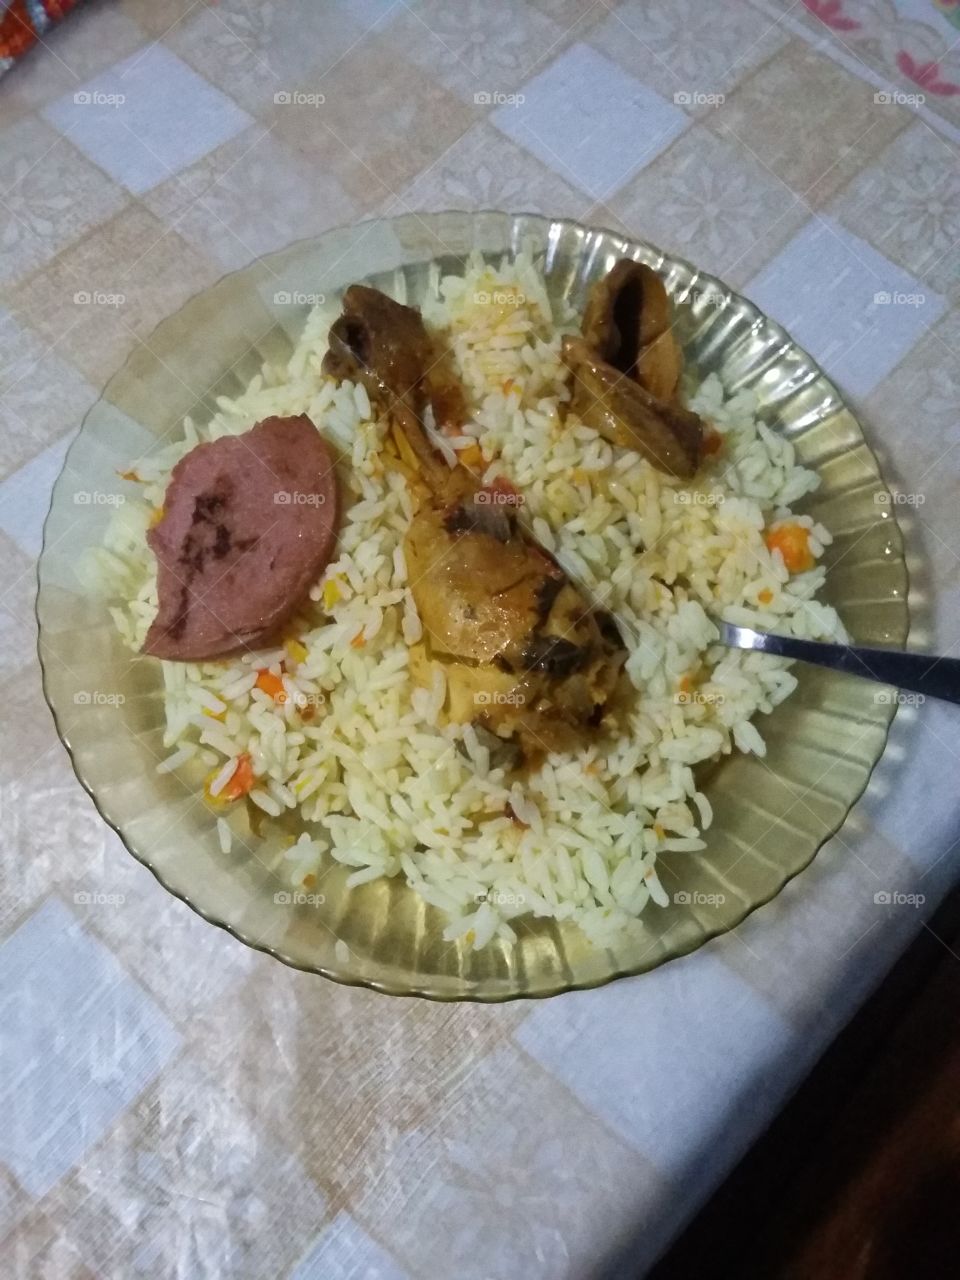 Dinner time!  Chicken and carrot rice.